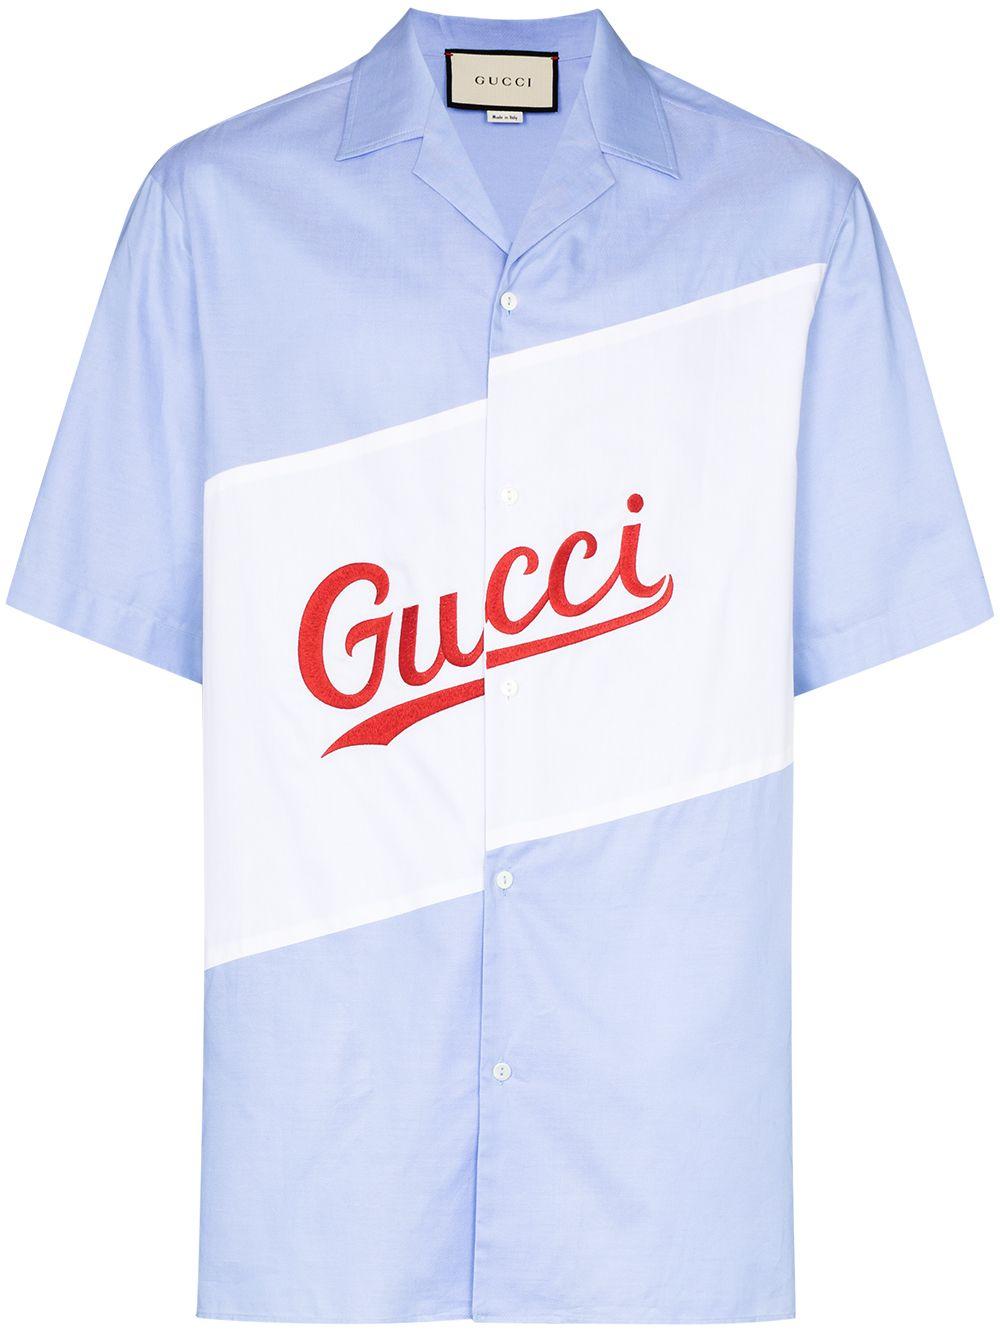 Gucci Synthetic Logo Script Oversize Bowling Shirt in Blue for Men - Lyst